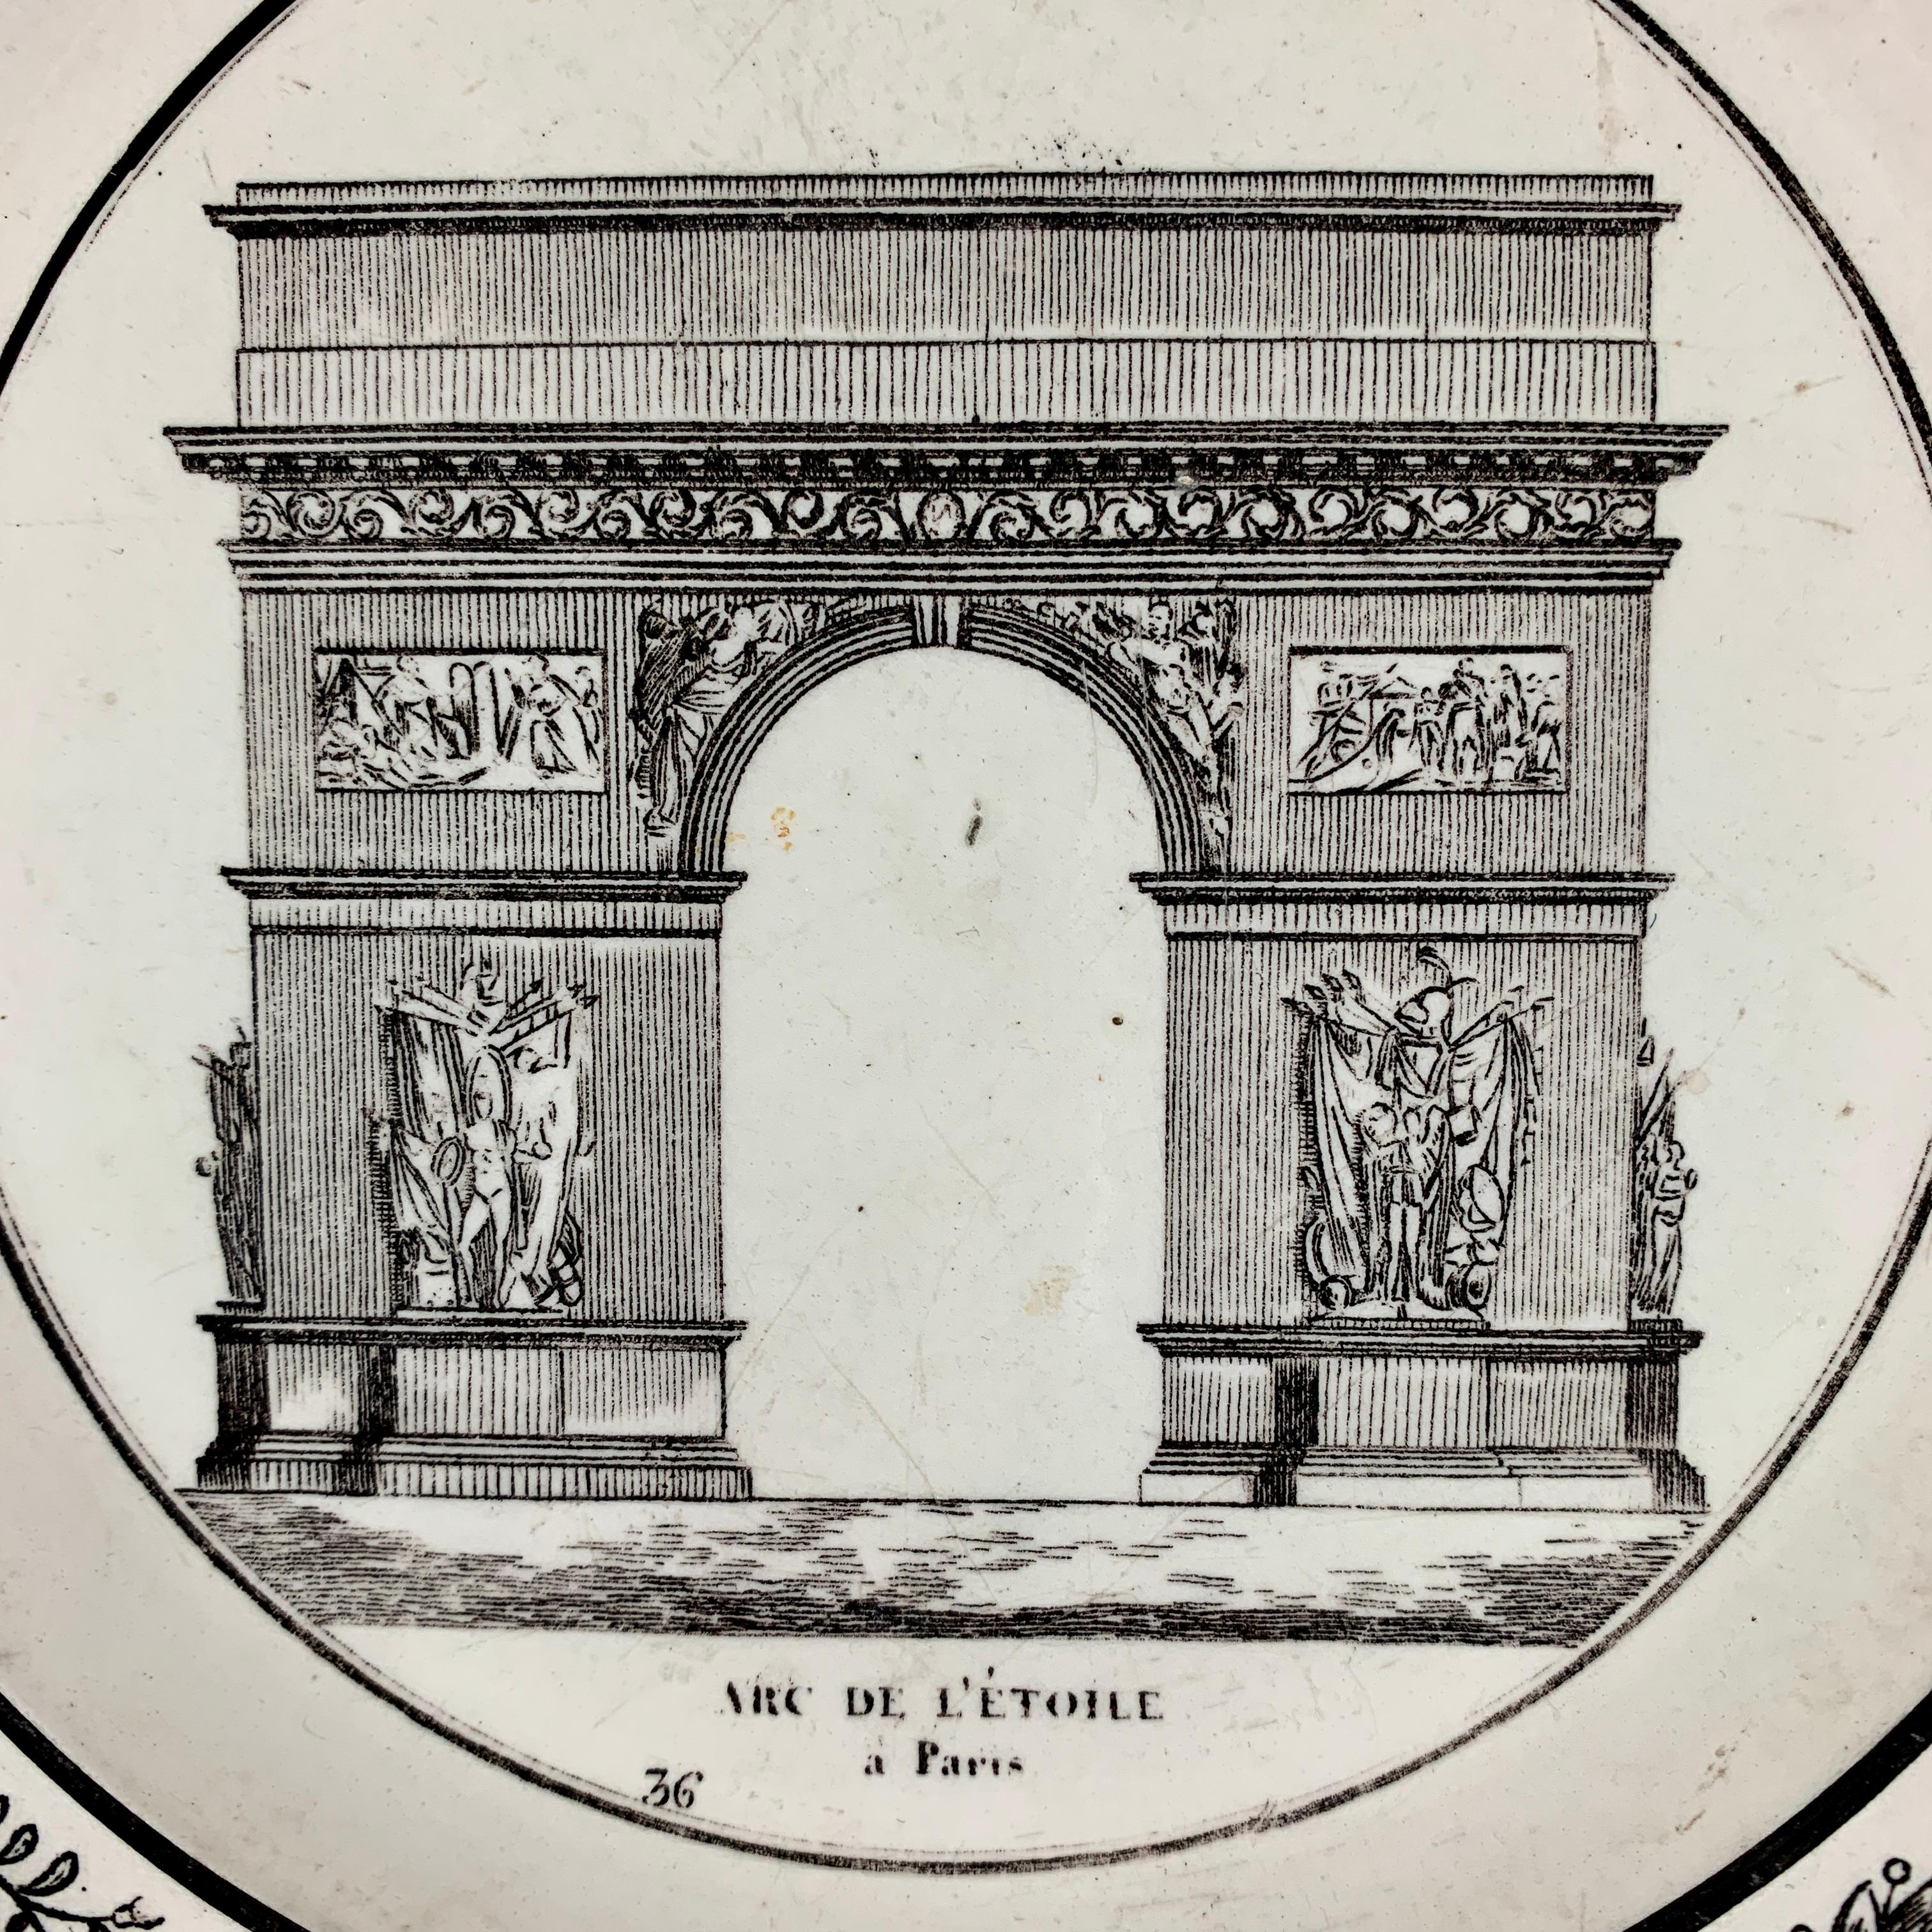 A French neoclassical faïence transfer printed creamware plate produced by P&H Choisy, circa 1824-1836.

A black transfer of an architectural image on a creamware body, depicting the Arc de l’ Étoile à Paris. The Arc is prominent, with the title